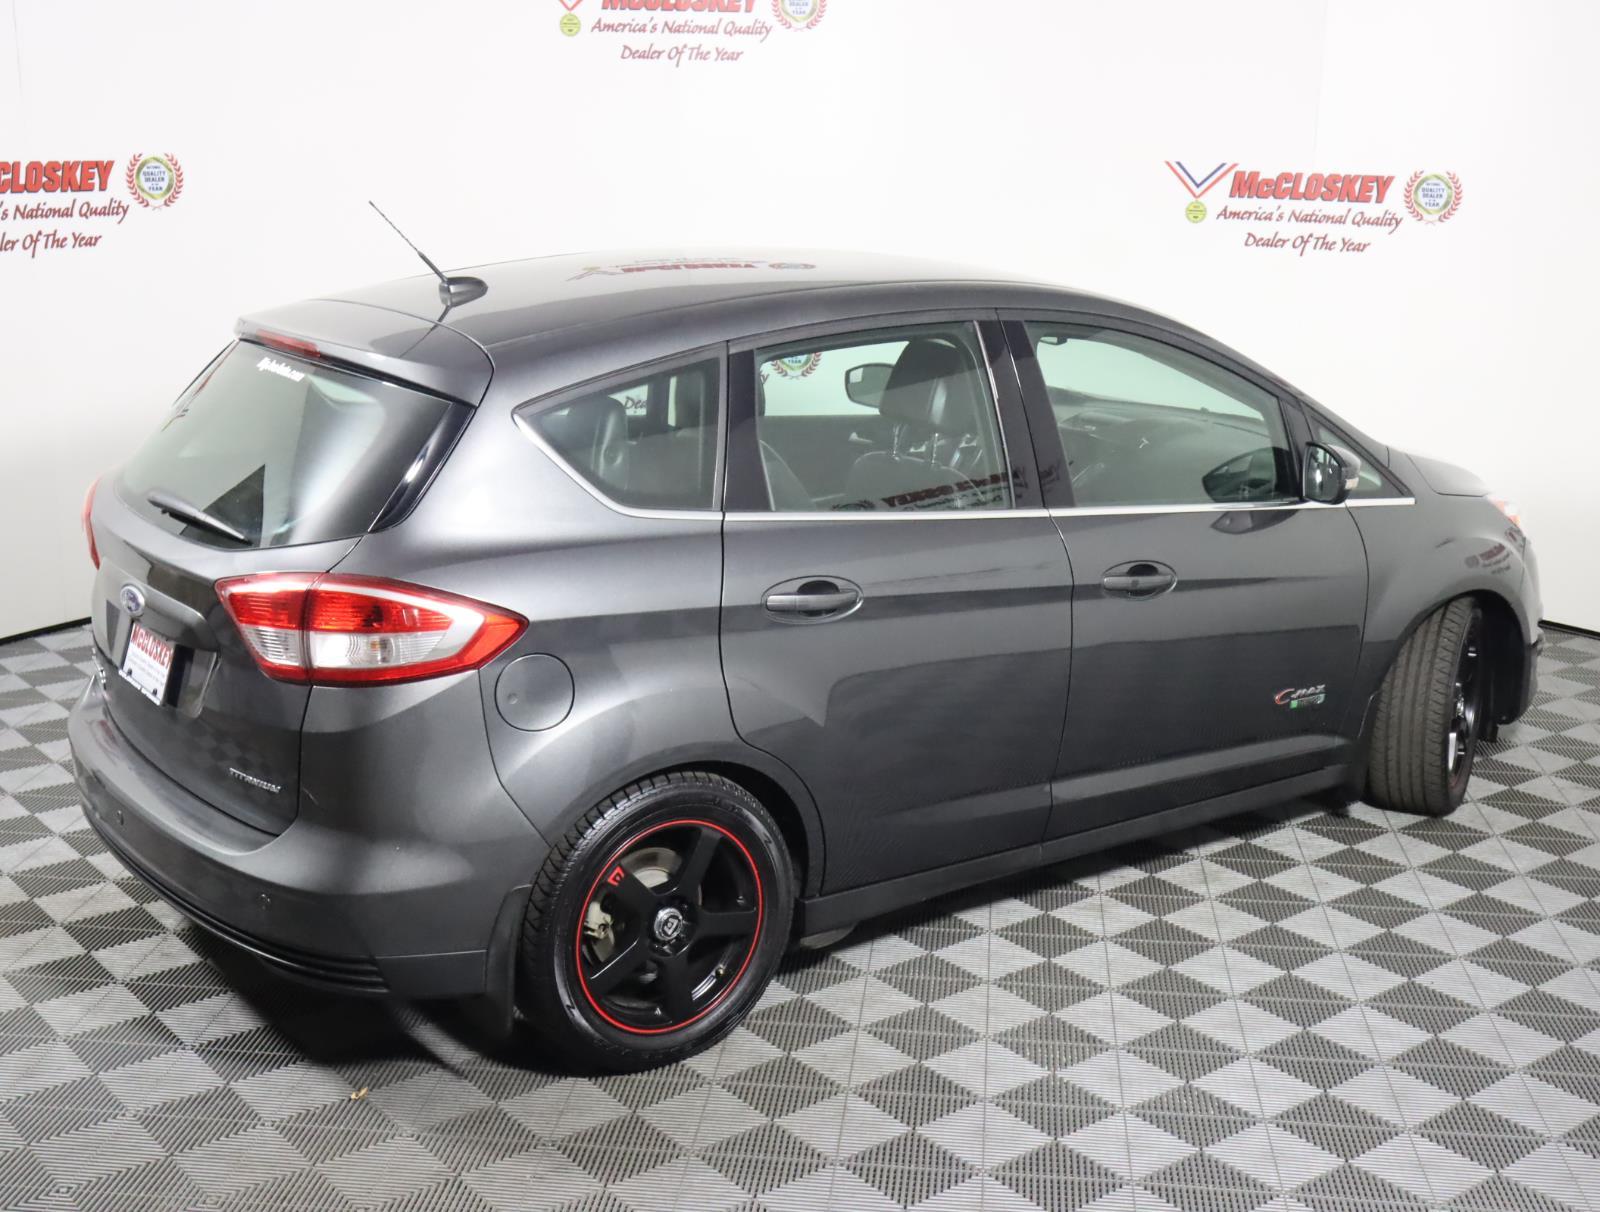 Preowned 2017 FORD C-max Titanium 40 MILES PER GALLON! for sale by McCloskey Imports & 4X4's in Colorado Springs, CO